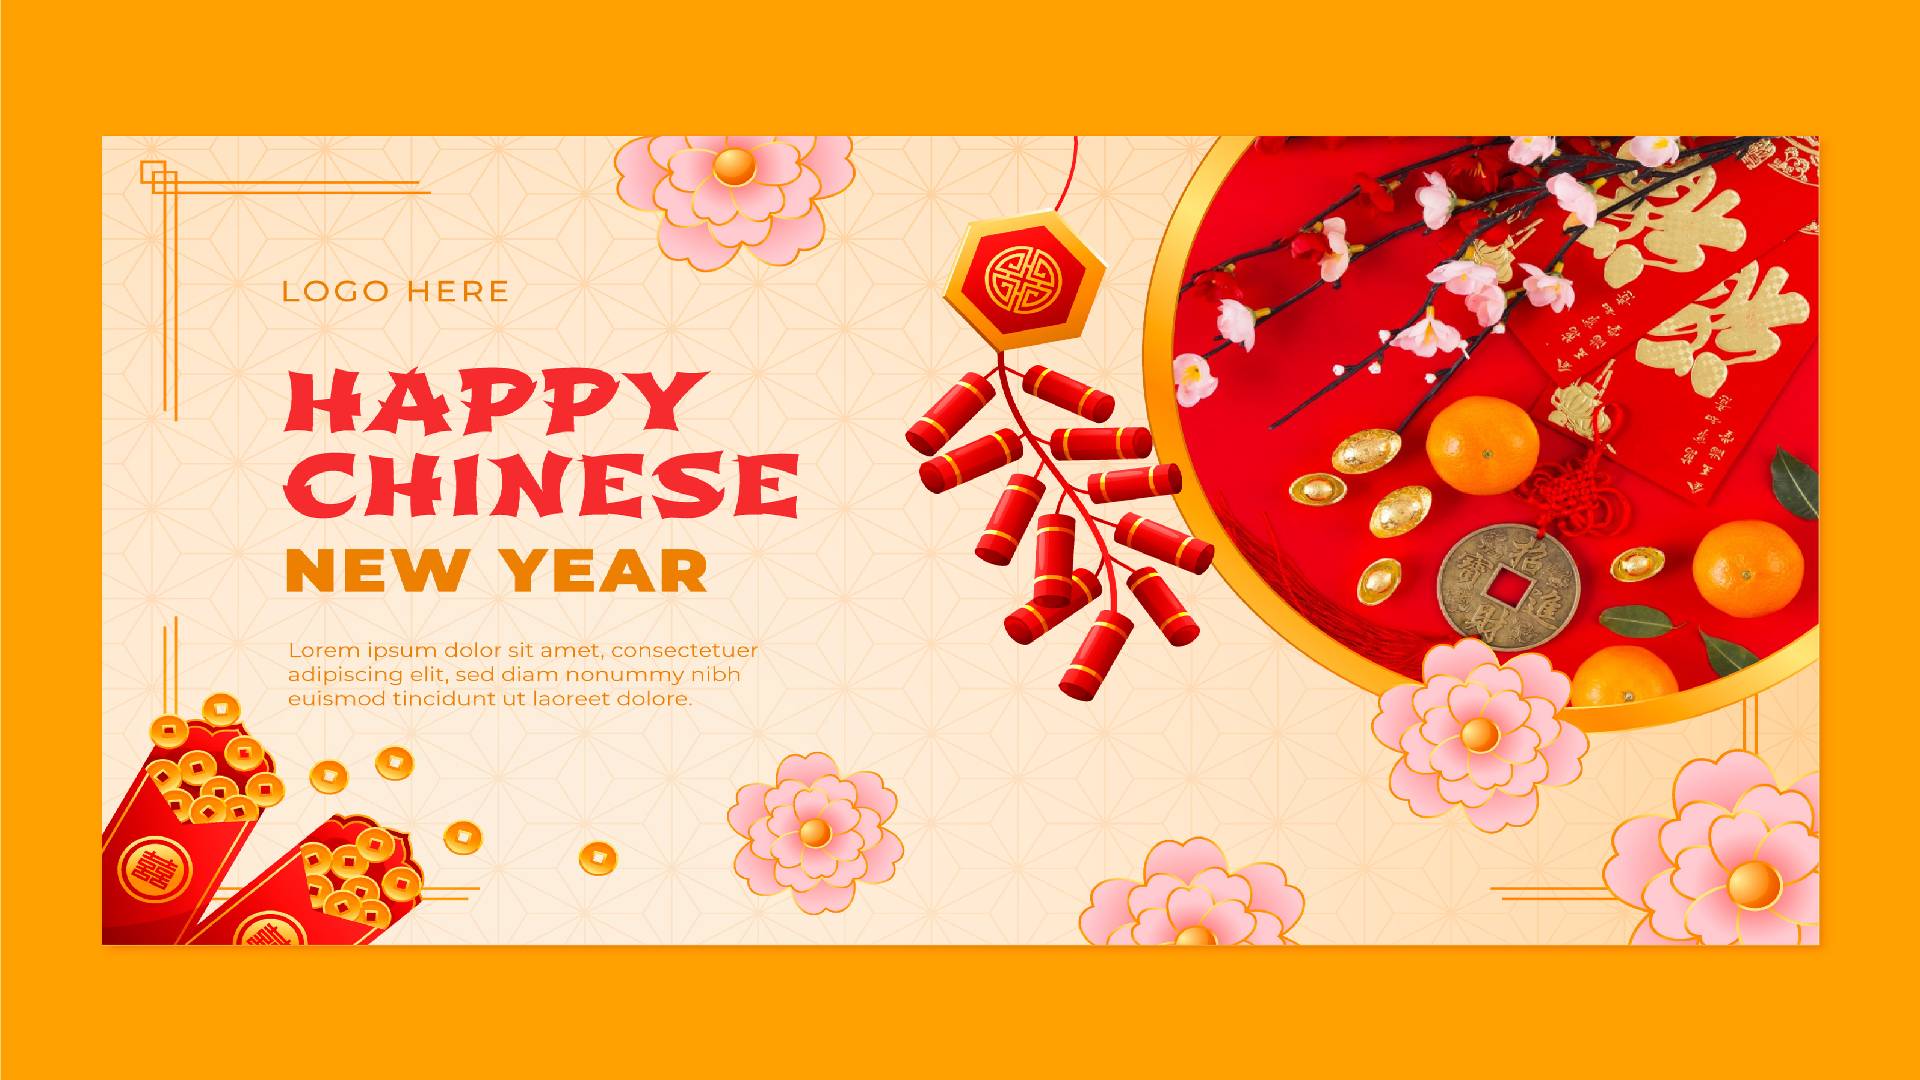 Notice of Spring Festival Vacation and Chinese New Year Greetings